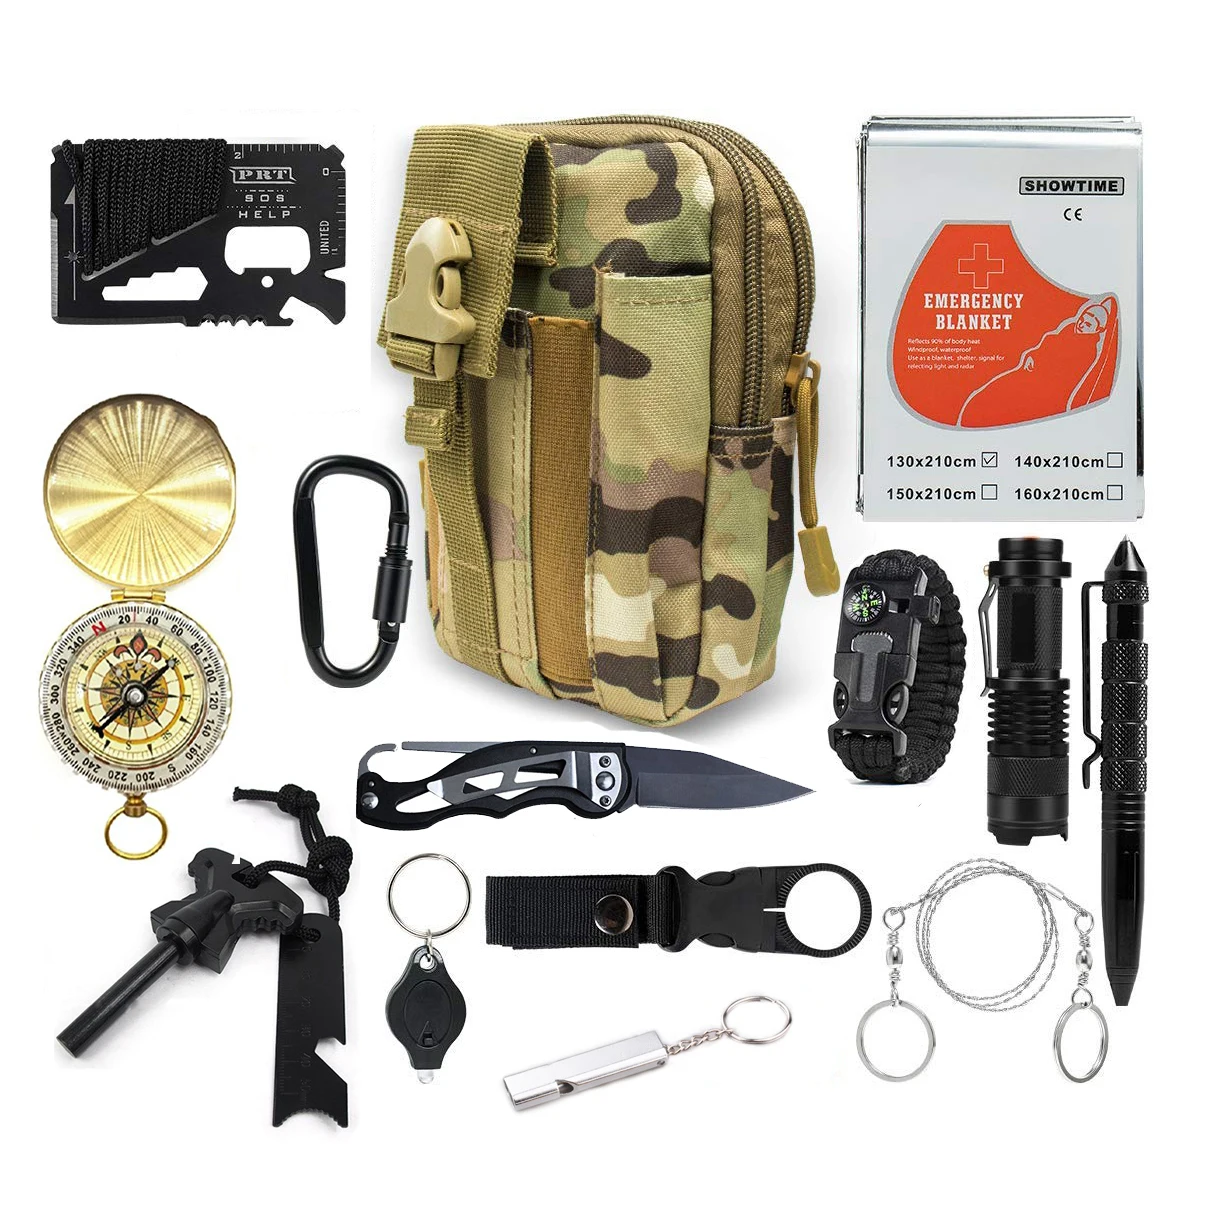 

AJOTEQPT SOS Outdoor Professional EDC Molle Bag Survival Gear Kit With Multi Professional Tools, Black/green